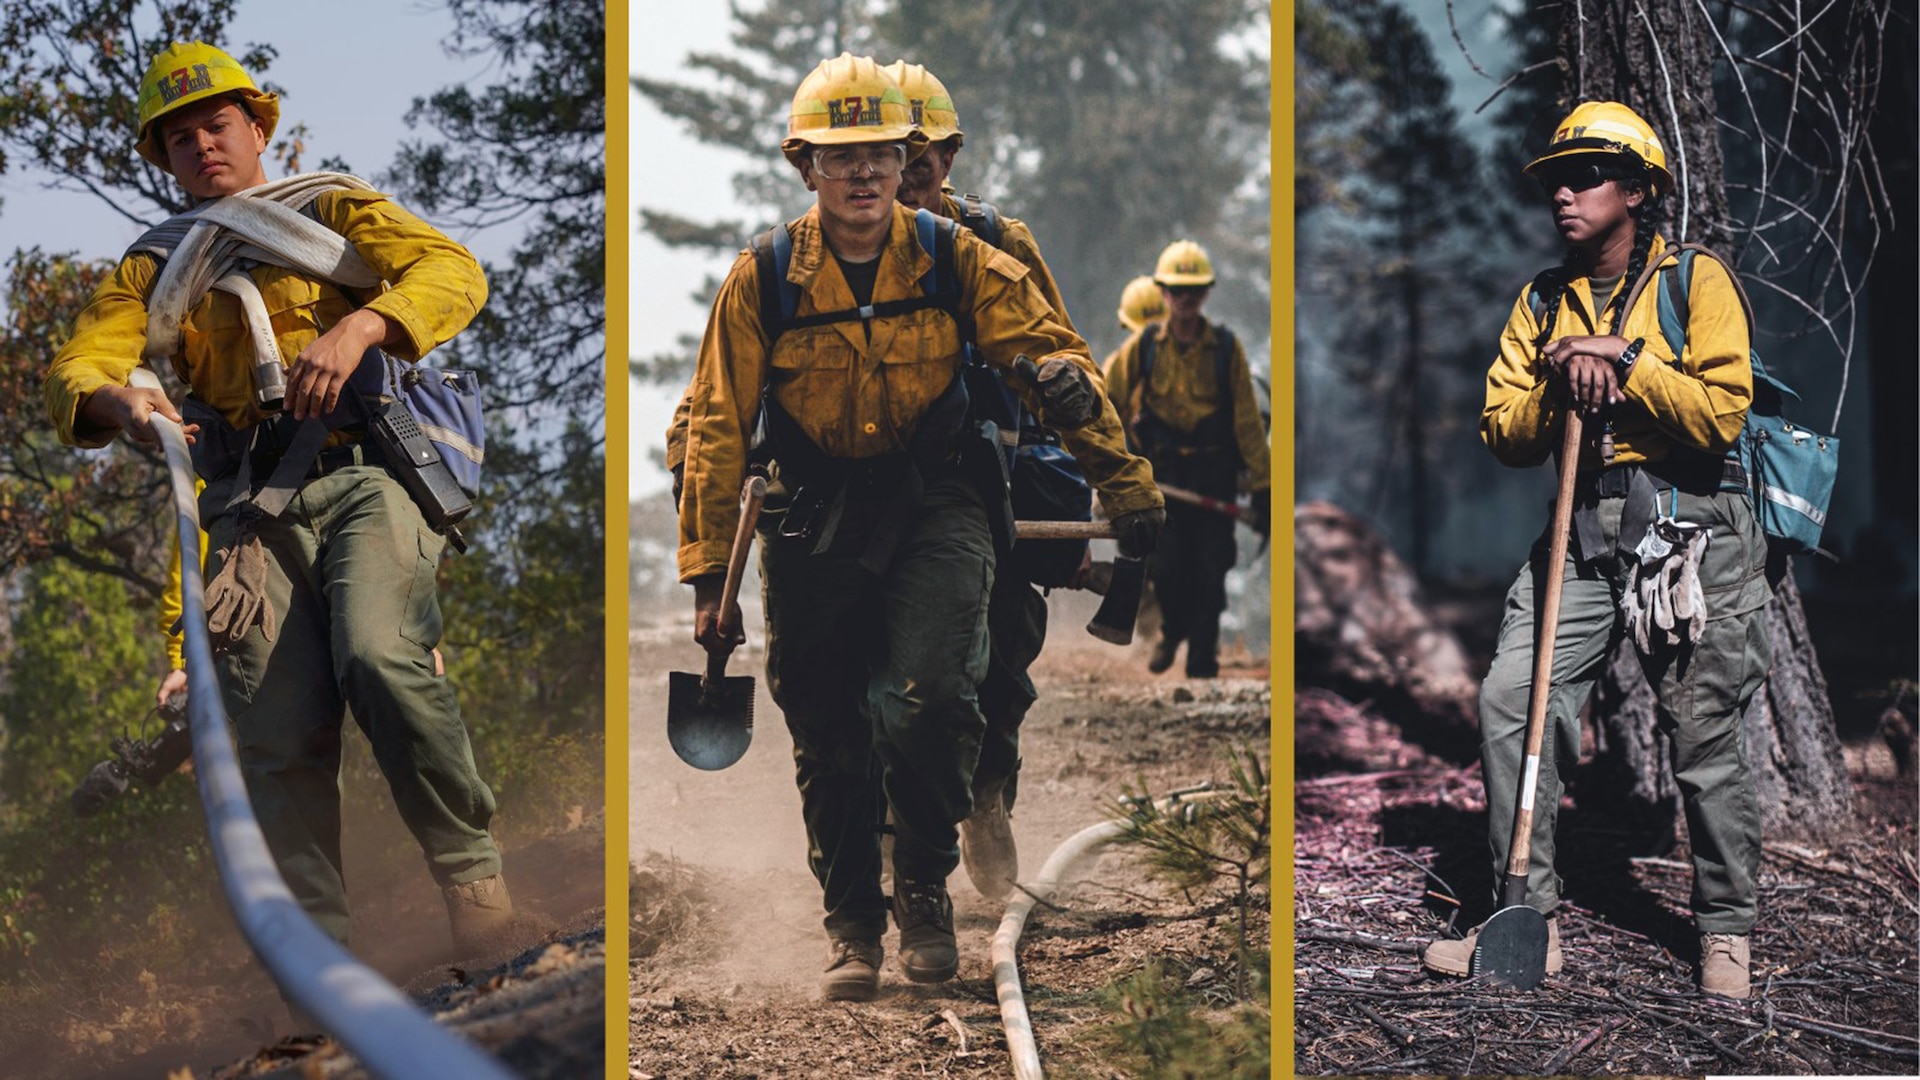 At the request of the National Interagency Fire Center, and in support of the U.S. Department of Agriculture’s Forest Service, U.S. Army North, U.S. Northern Command’s Joint Force Land Component Command, concluded its wildland fire ground response operations in California Oct. 20.